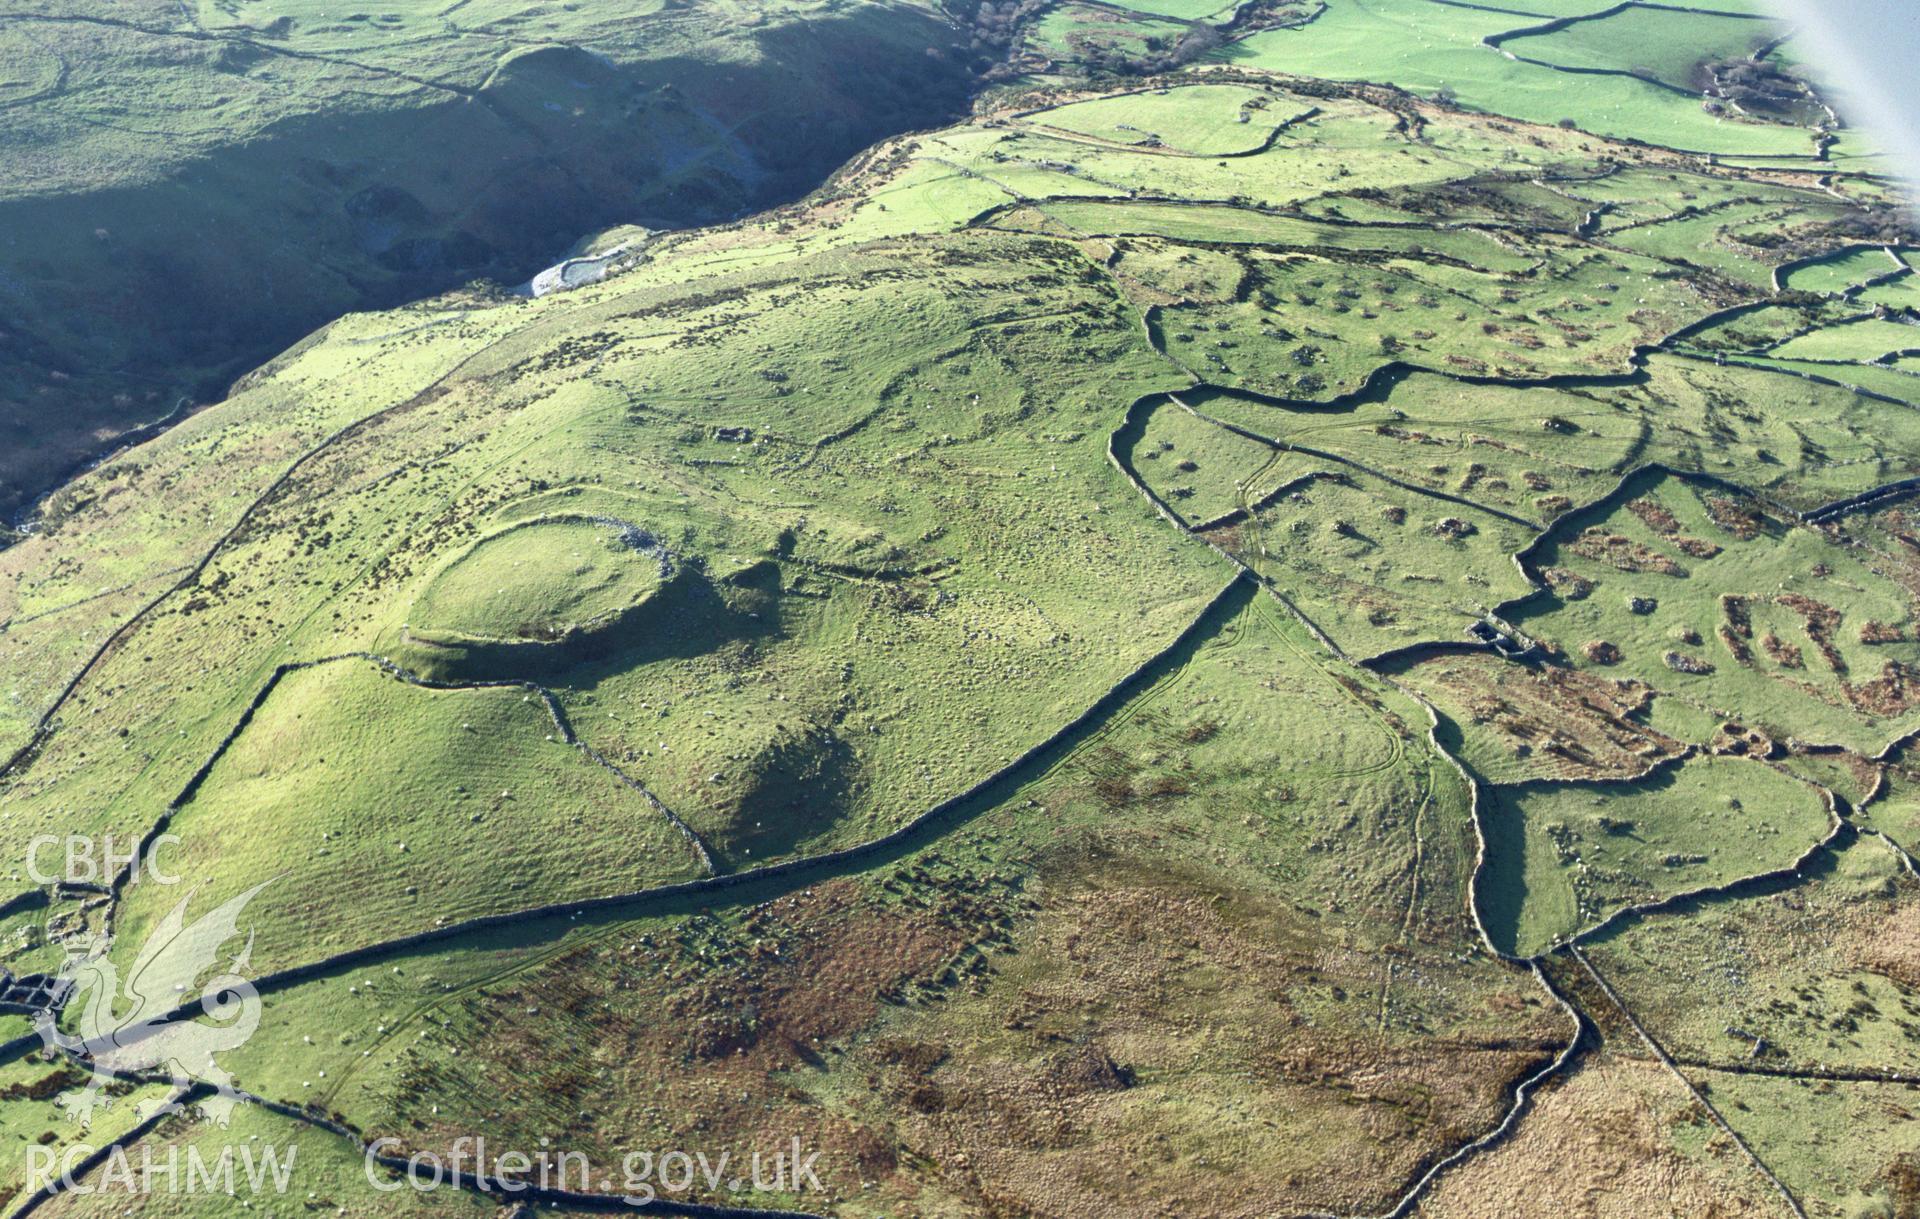 Slide of RCAHMW colour oblique aerial photograph of Pen Dinas Hillfort and field systems at Ardudwy, taken by T.G. Driver, 2005.